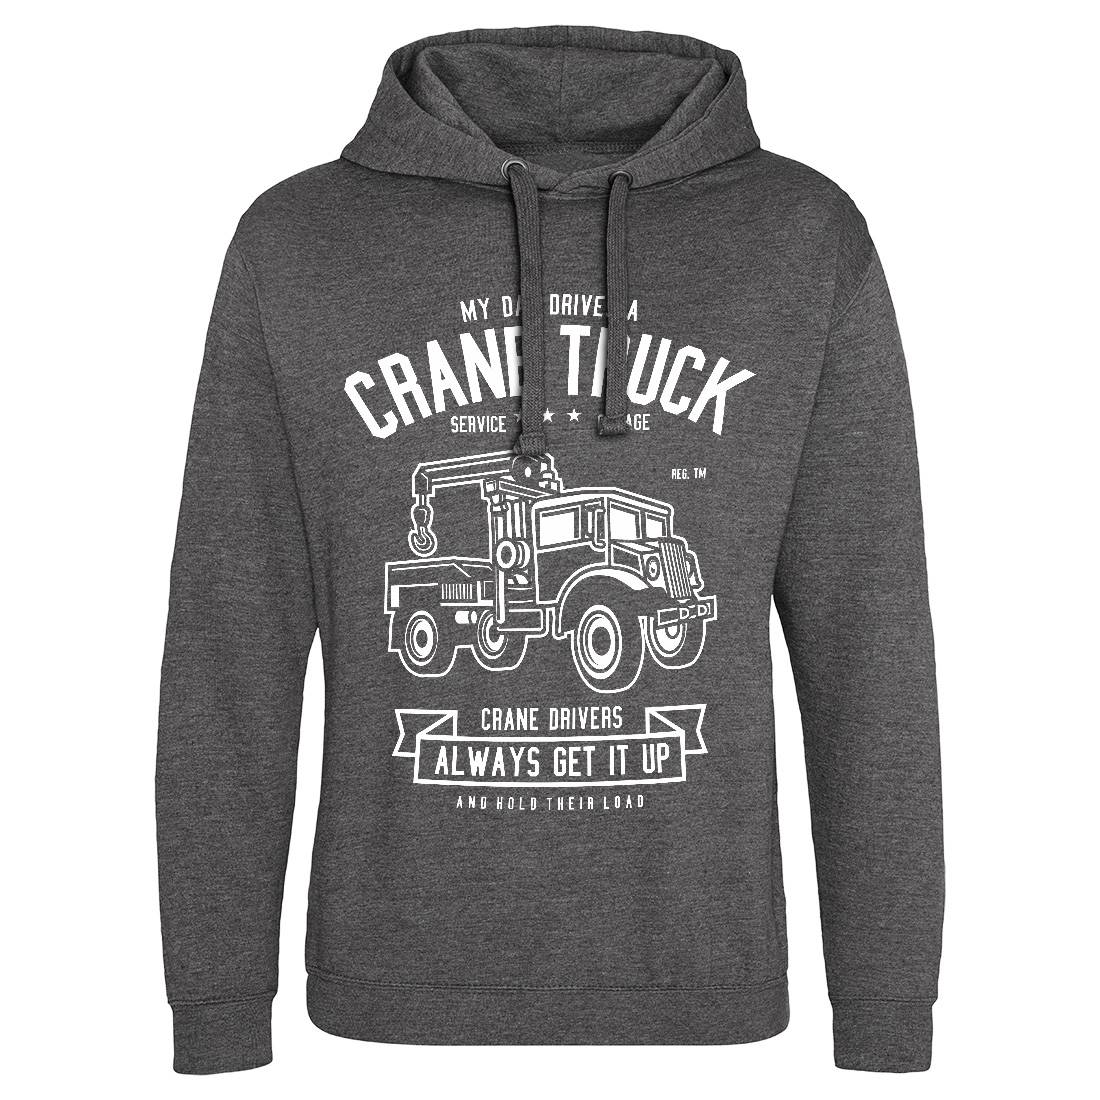 Crane Truck Mens Hoodie Without Pocket Vehicles B520